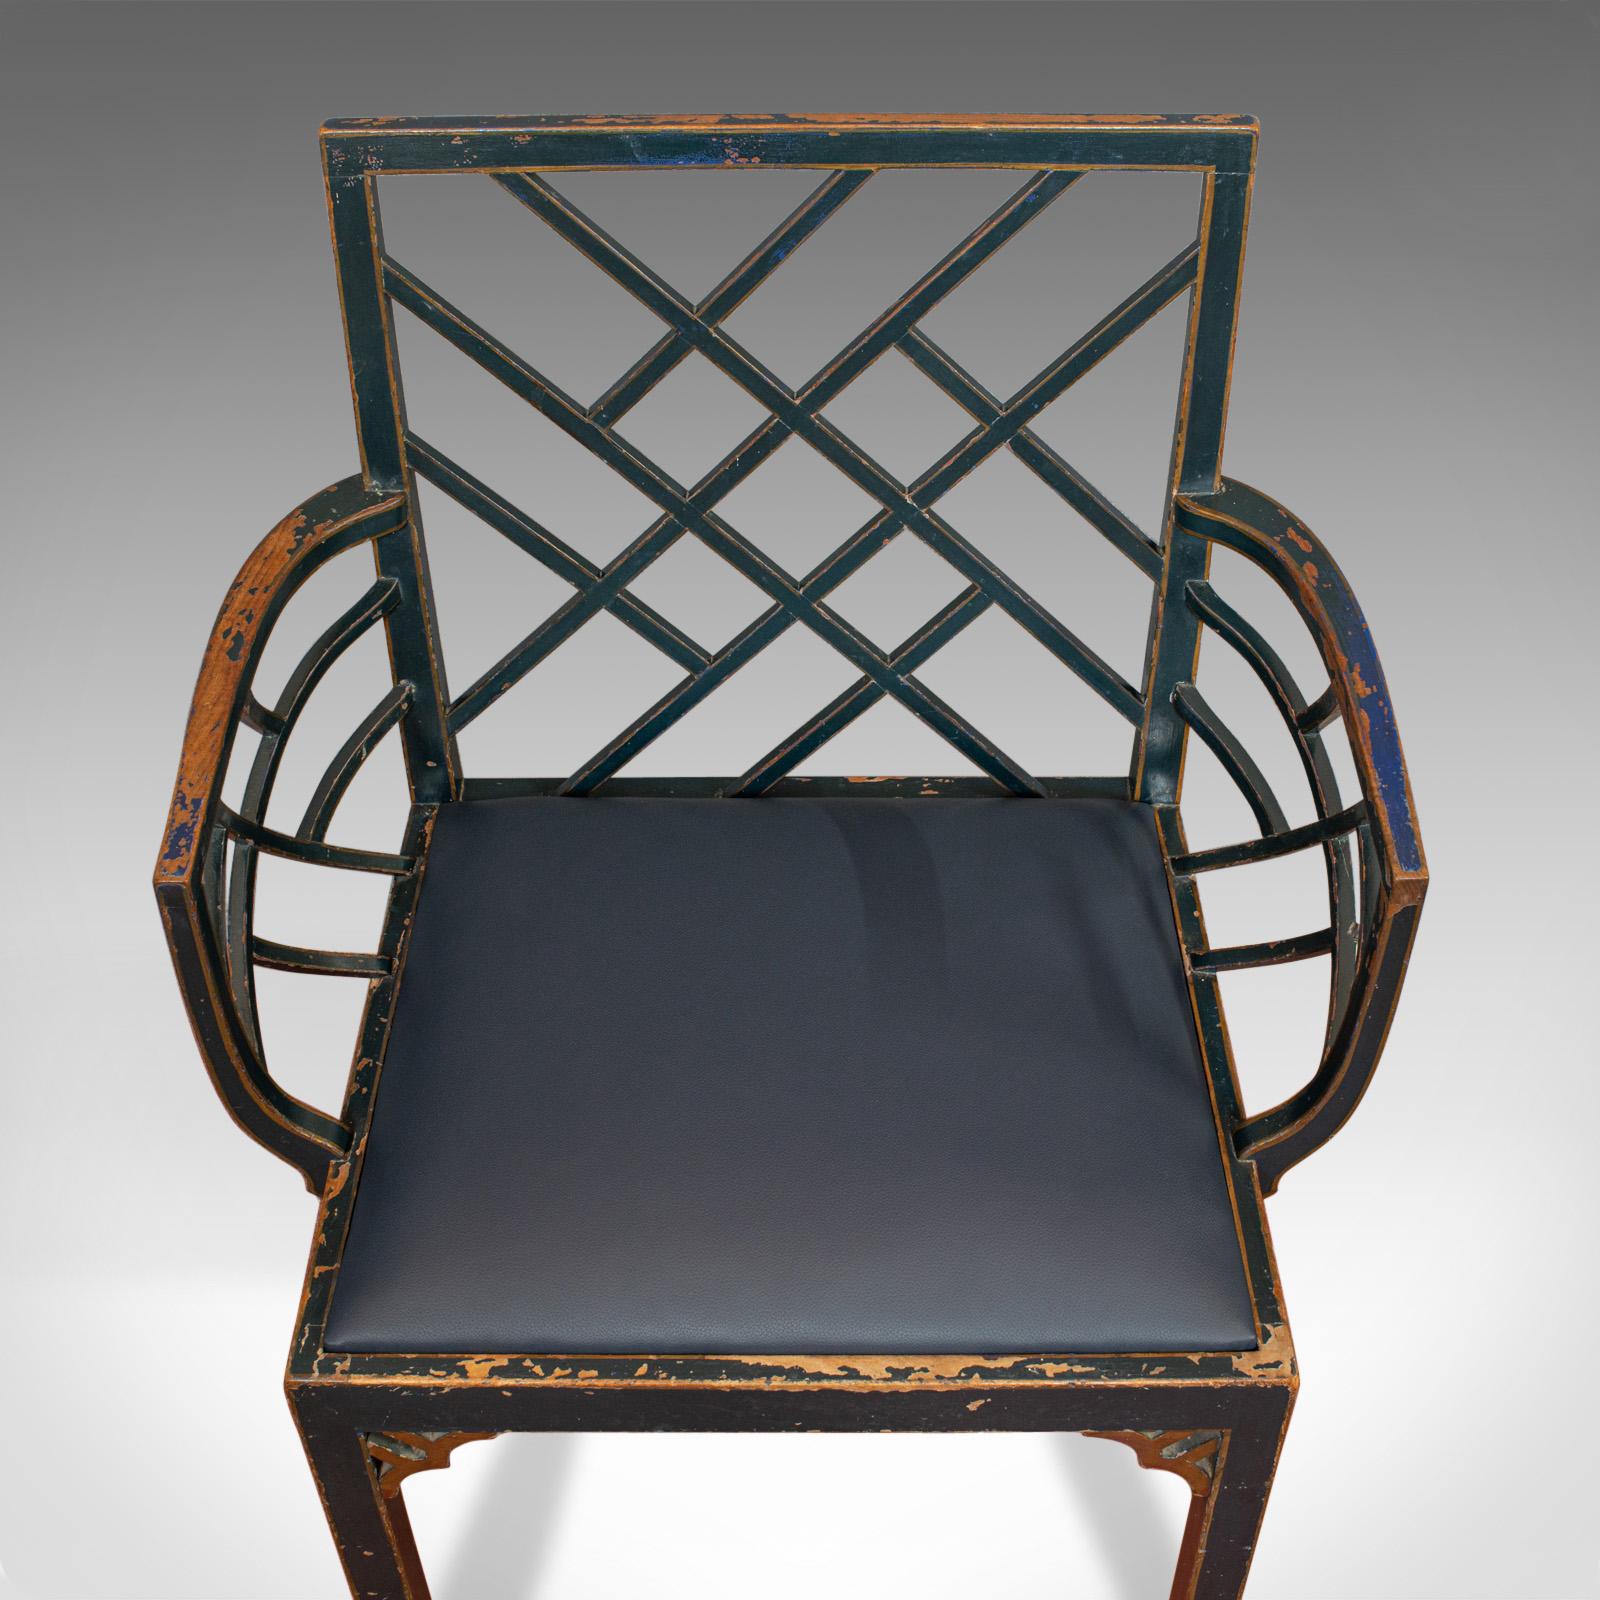 Beech Antique Birdcage Elbow Chair, English, Painted, Leather, Regency, circa 1820